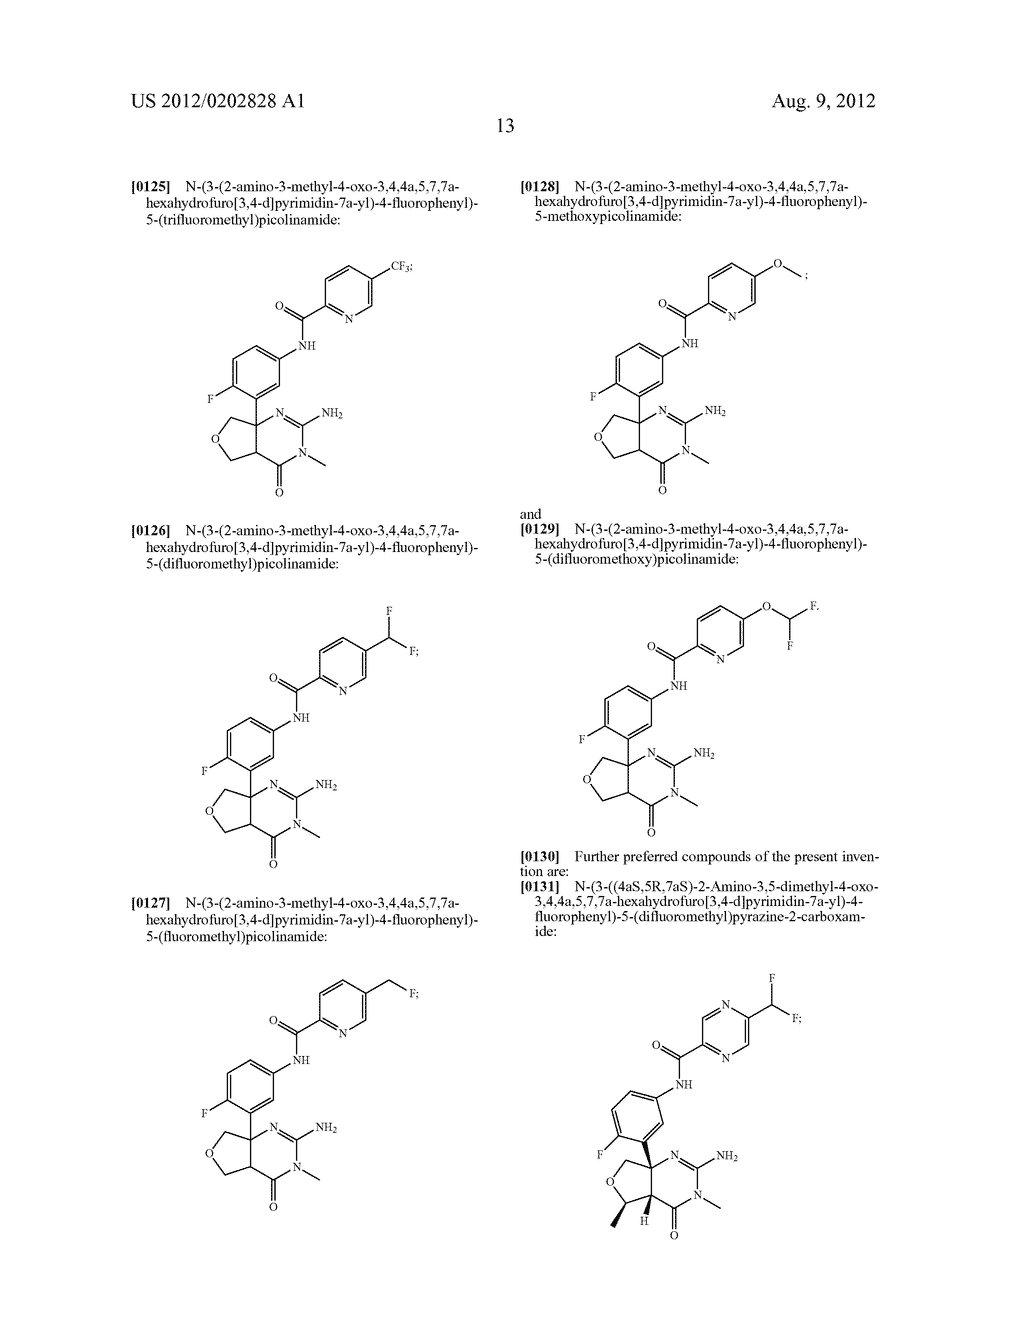 FUSED AMINODIHYDROPYRIMIDONE DERIVATIVES - diagram, schematic, and image 14